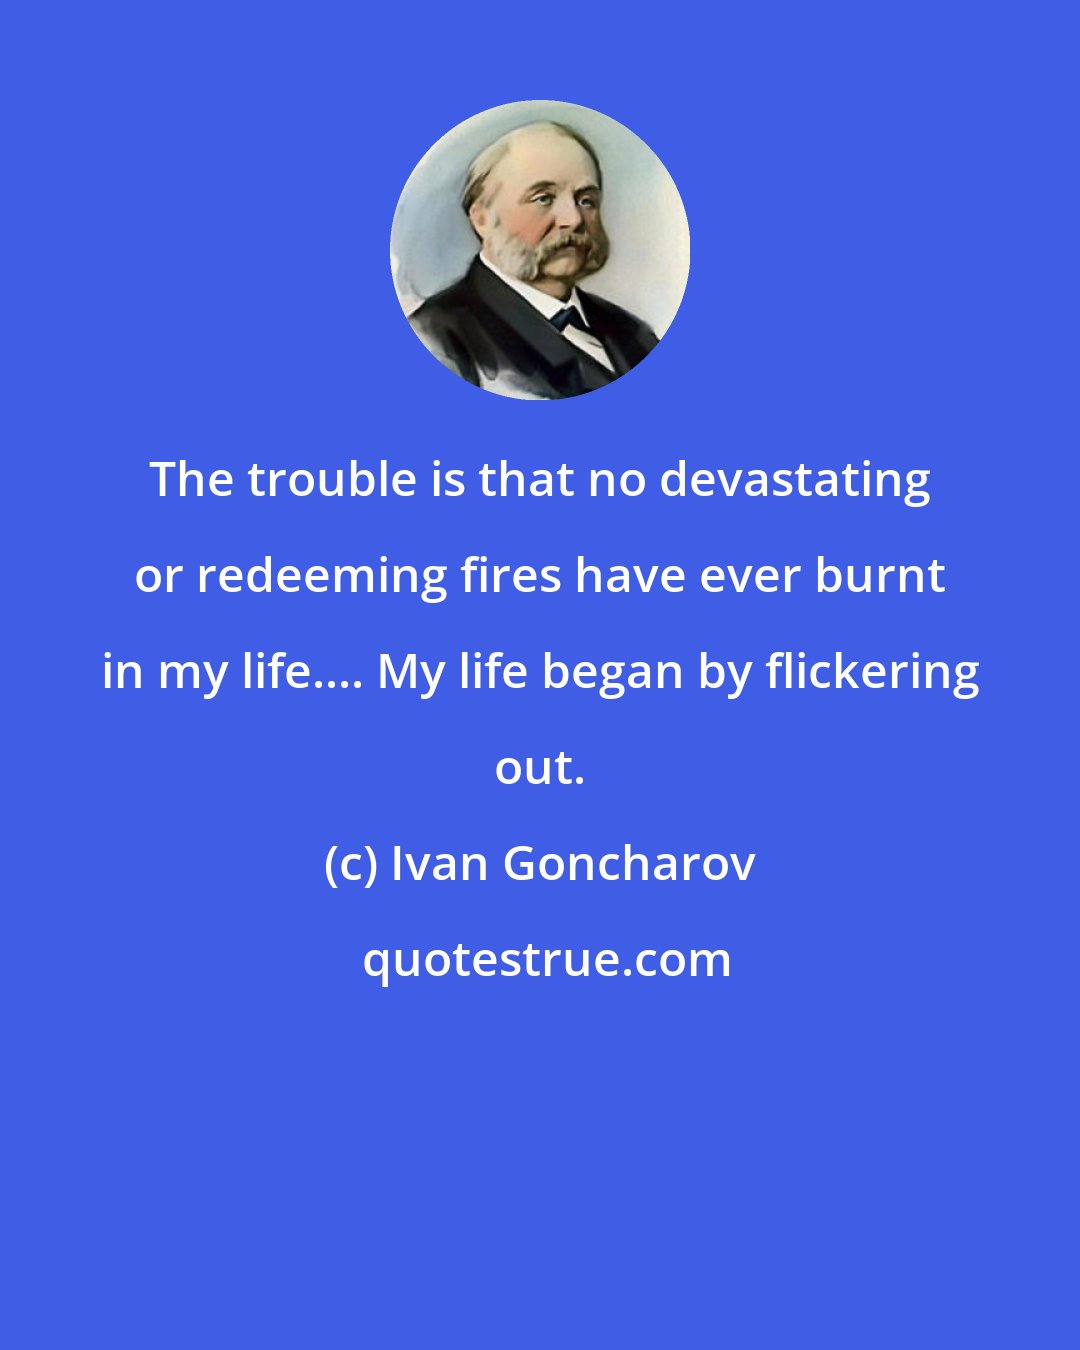 Ivan Goncharov: The trouble is that no devastating or redeeming fires have ever burnt in my life.... My life began by flickering out.